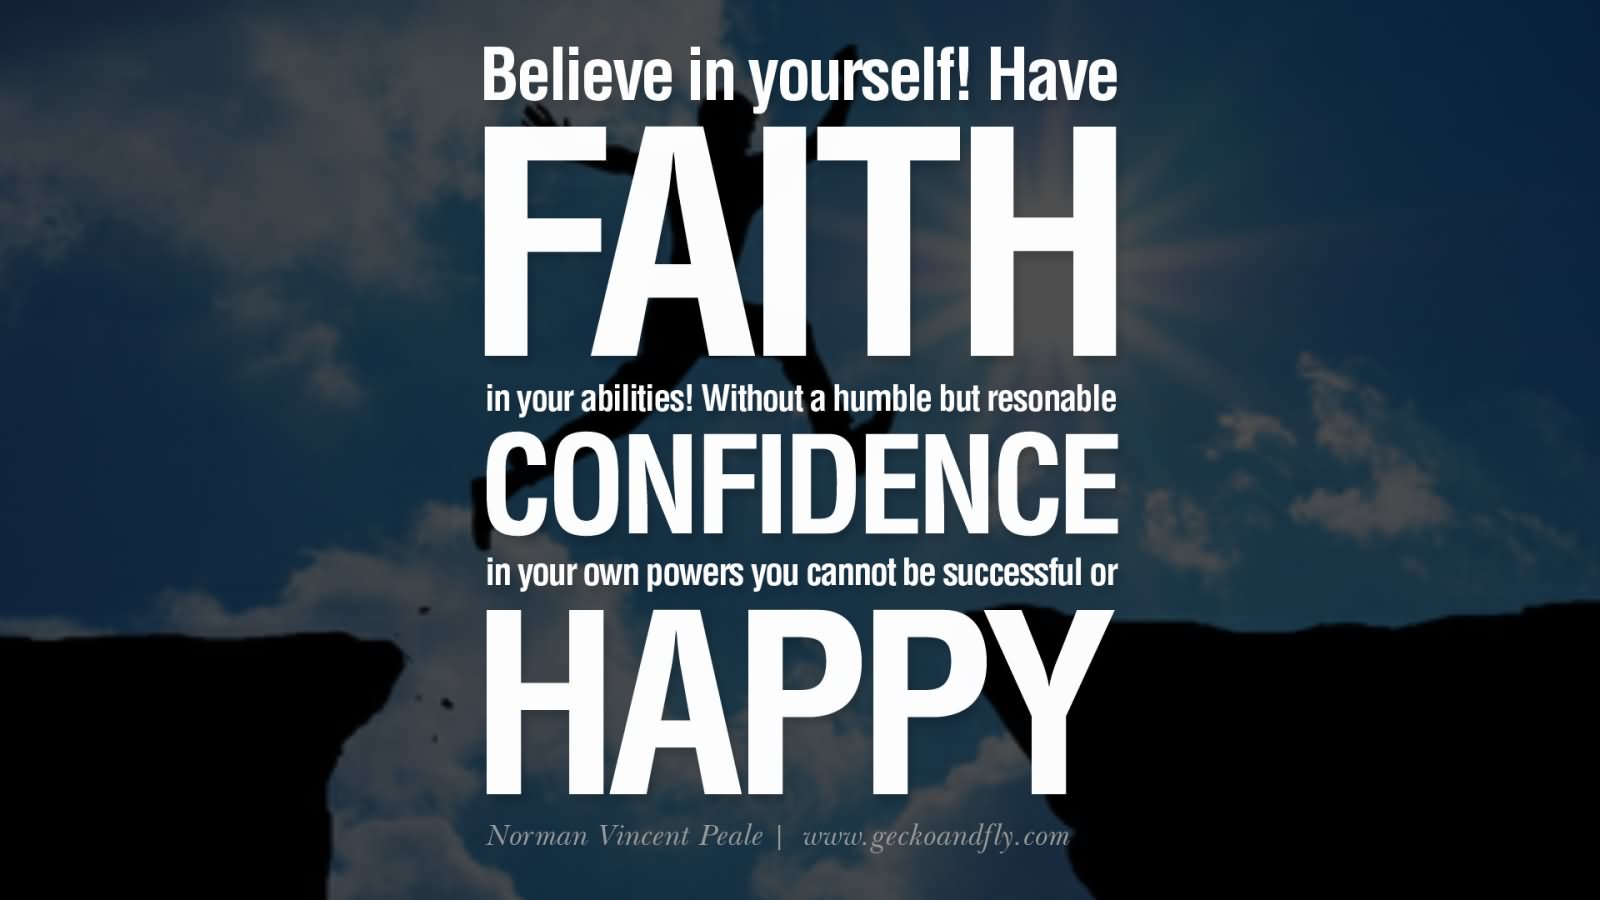 Believe in yourself! Have faith in your abilities! Without a humble but reasonable confidence in your own powers you cannot be successful or happy. - Norman